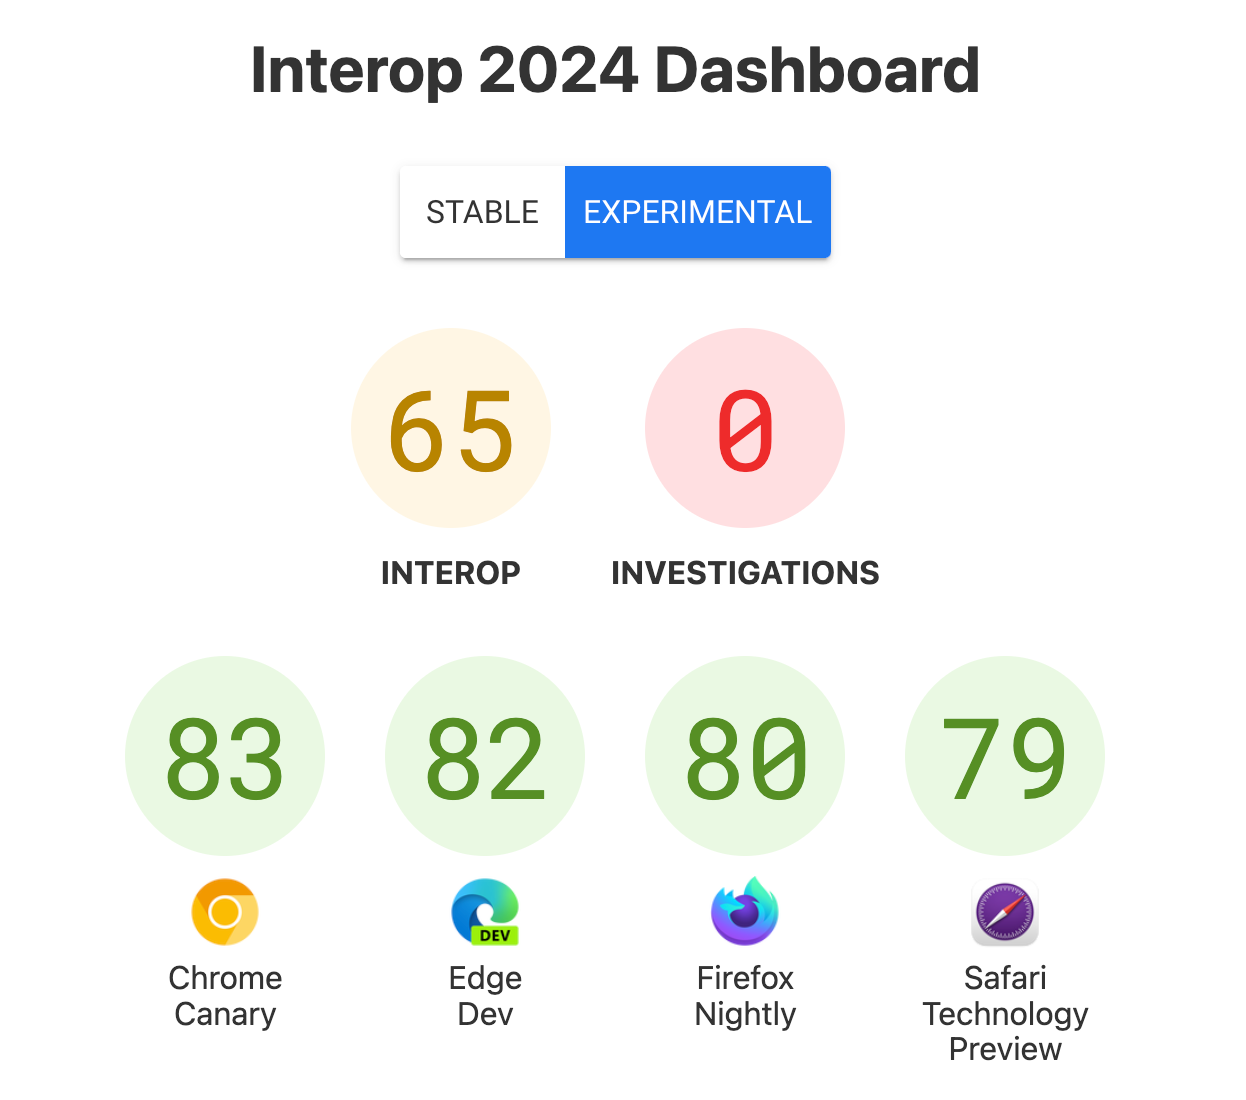 Screenshot of the dashboard with scores - Interop: 65, Investigations: 0, Chrome Canary: 83, Edge Dev: 82, Firefox Nightly: 80, Safari Technology Preview: 79.